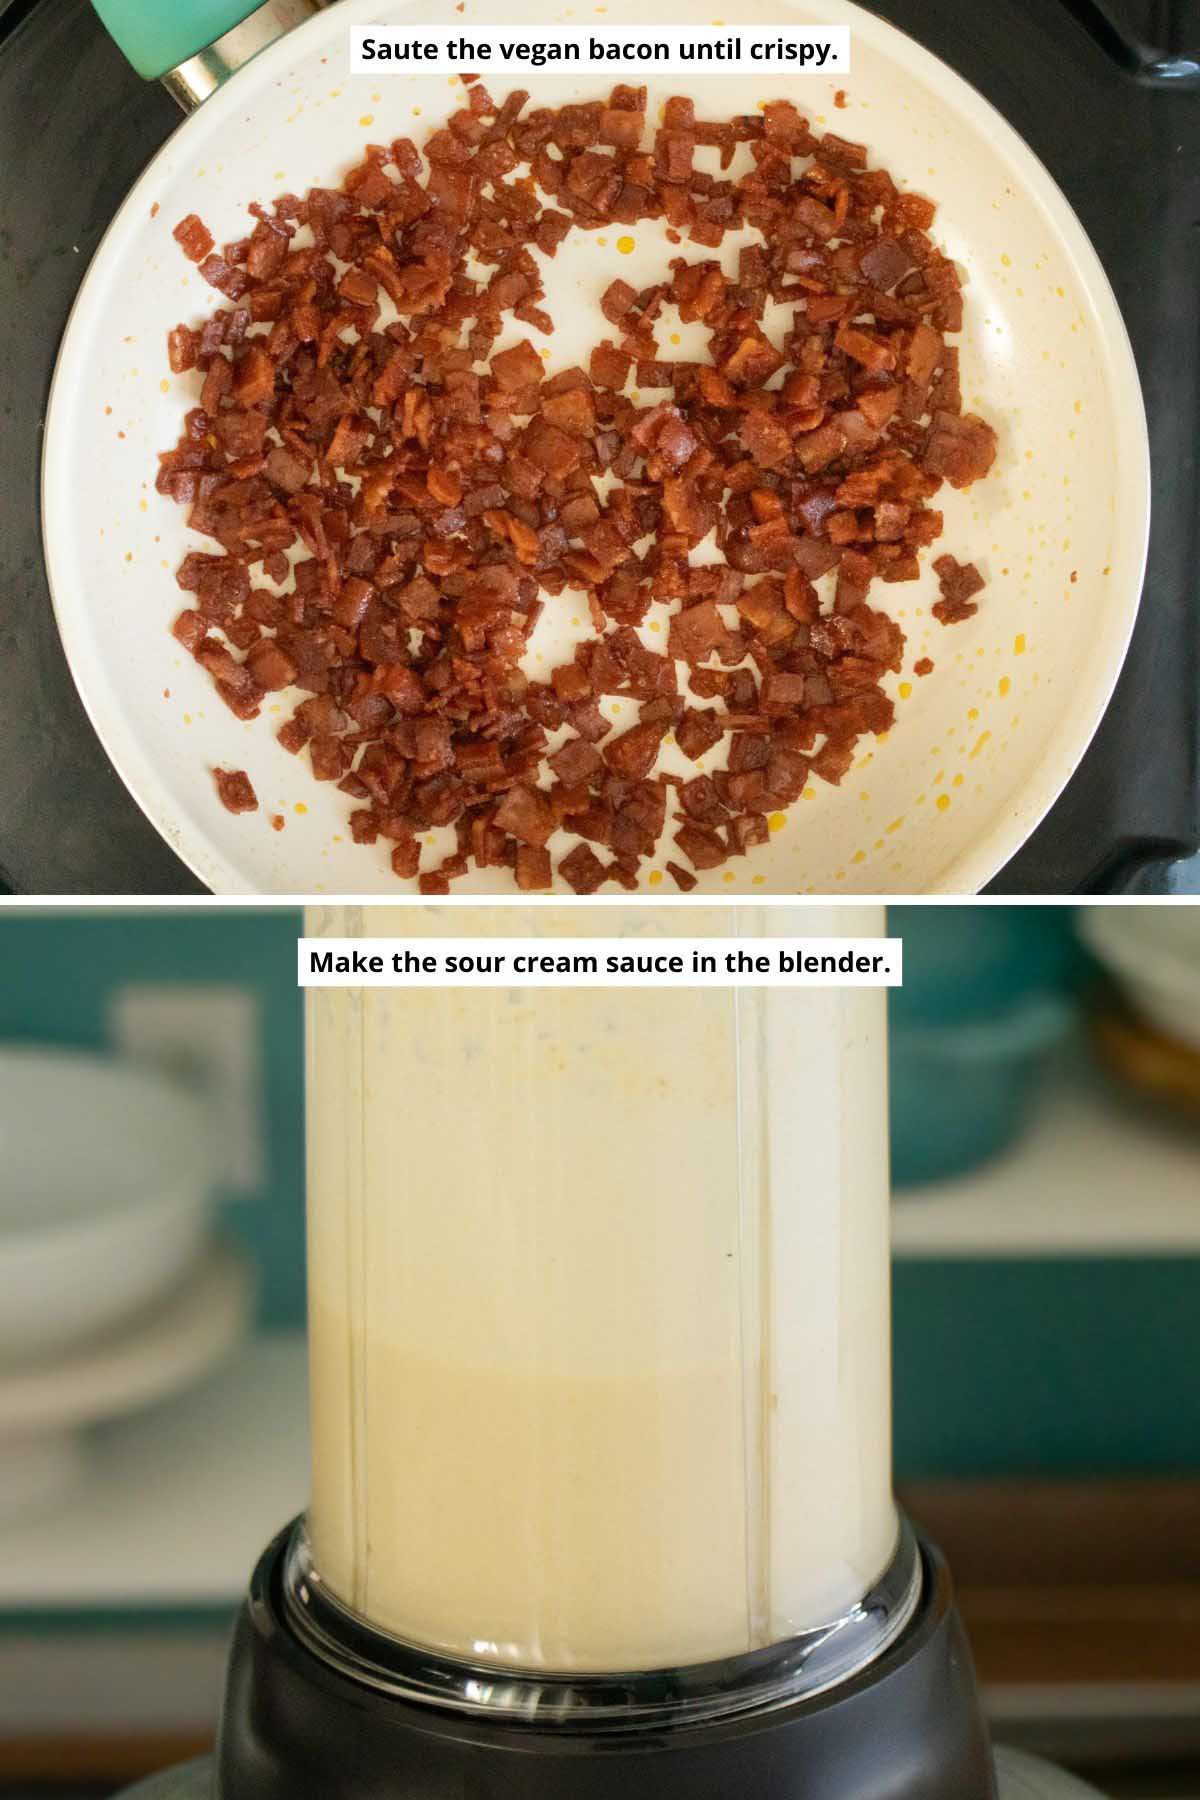 cooked vegan bacon pieces in a frying pan, cream sauce in the blender after blending